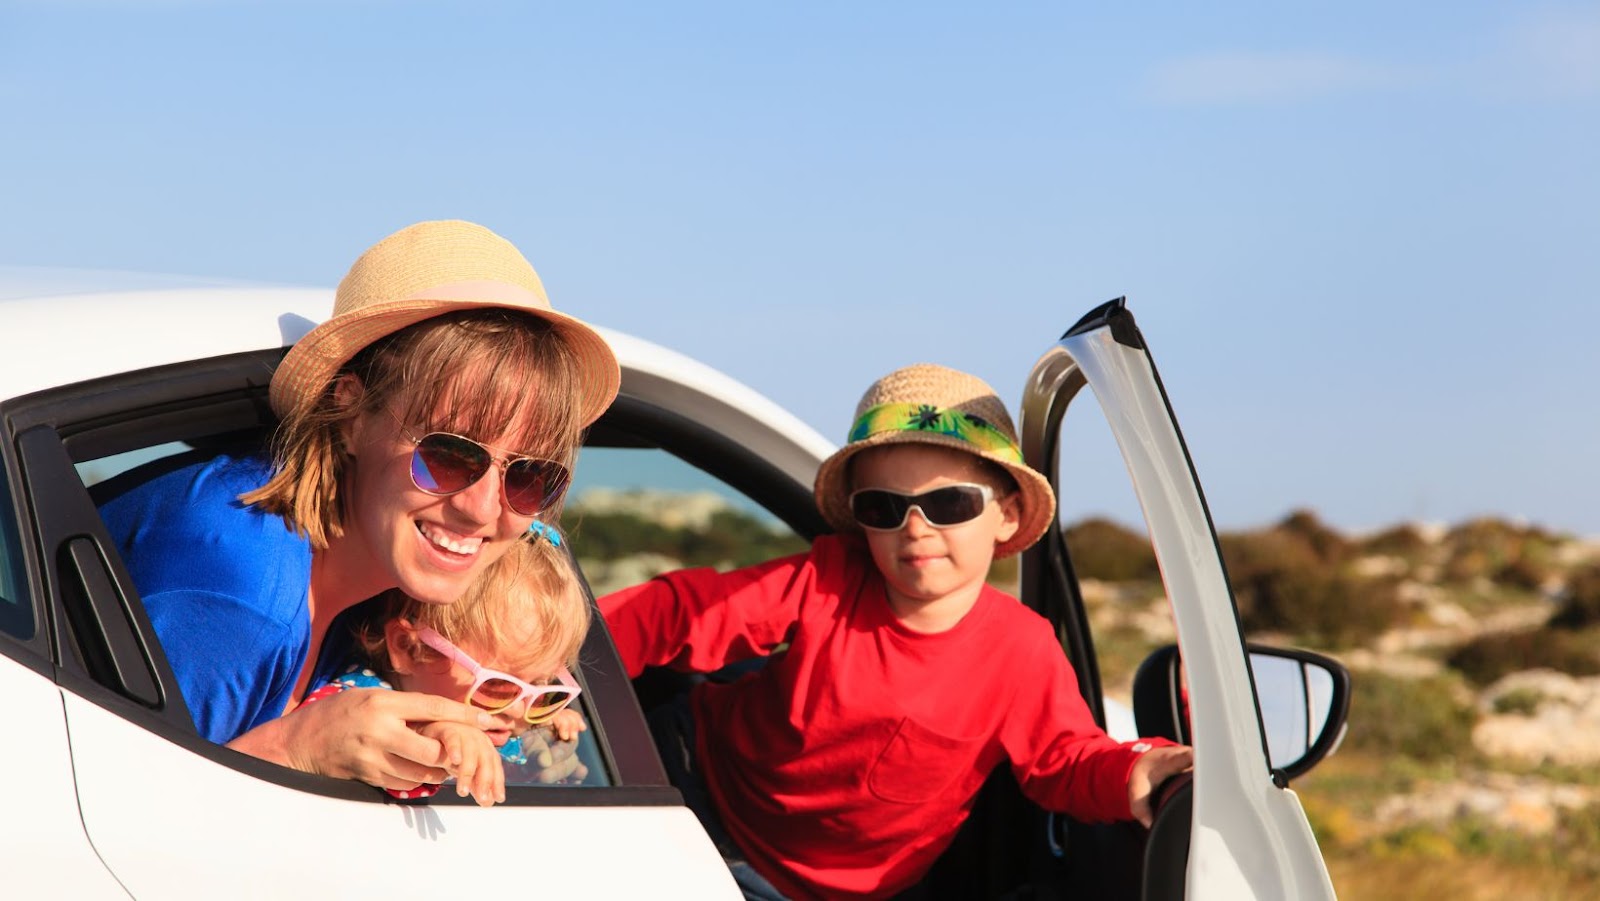 How To Travel Full Time With A Family: Tips For Planning The Perfect Family Vacation